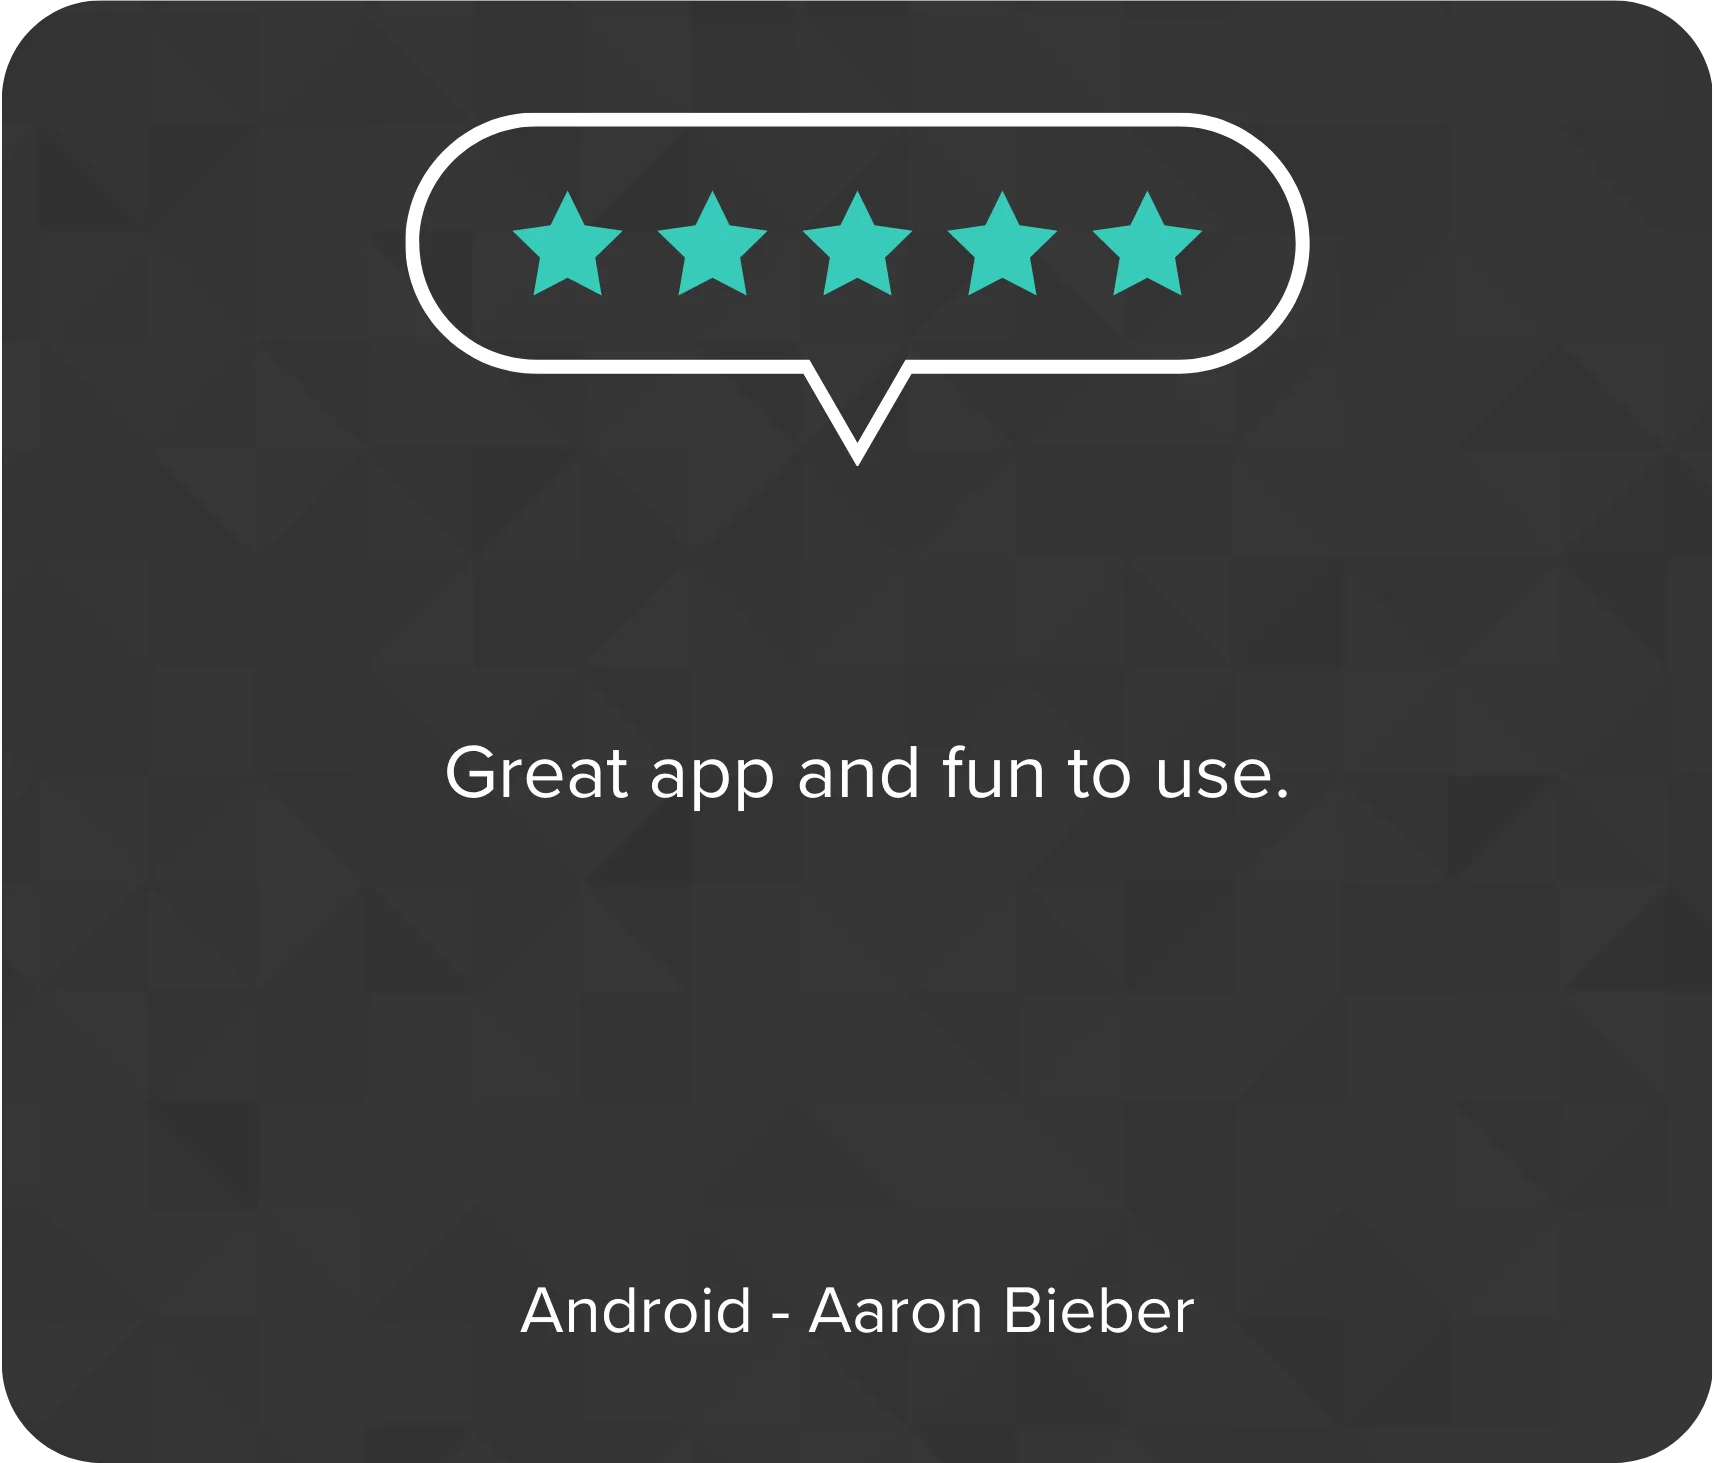 App store review from Android user